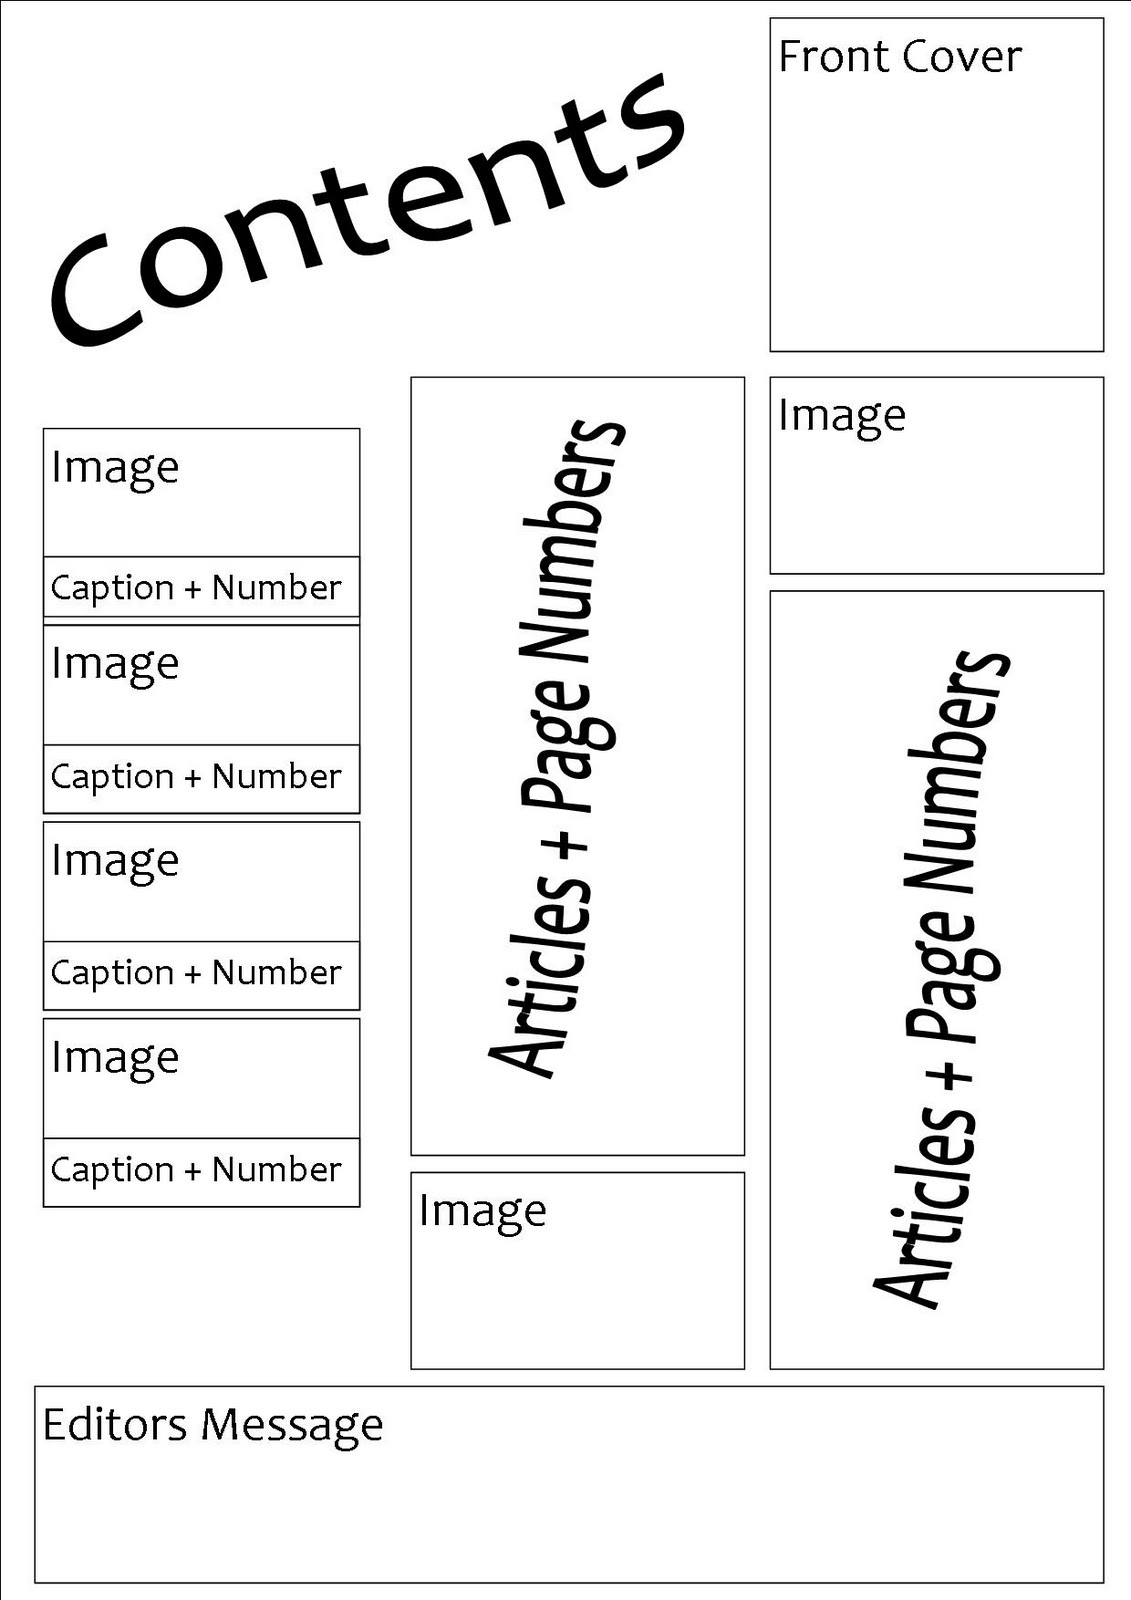 Will's AS Media Blog: Contents Page Layout Ideas